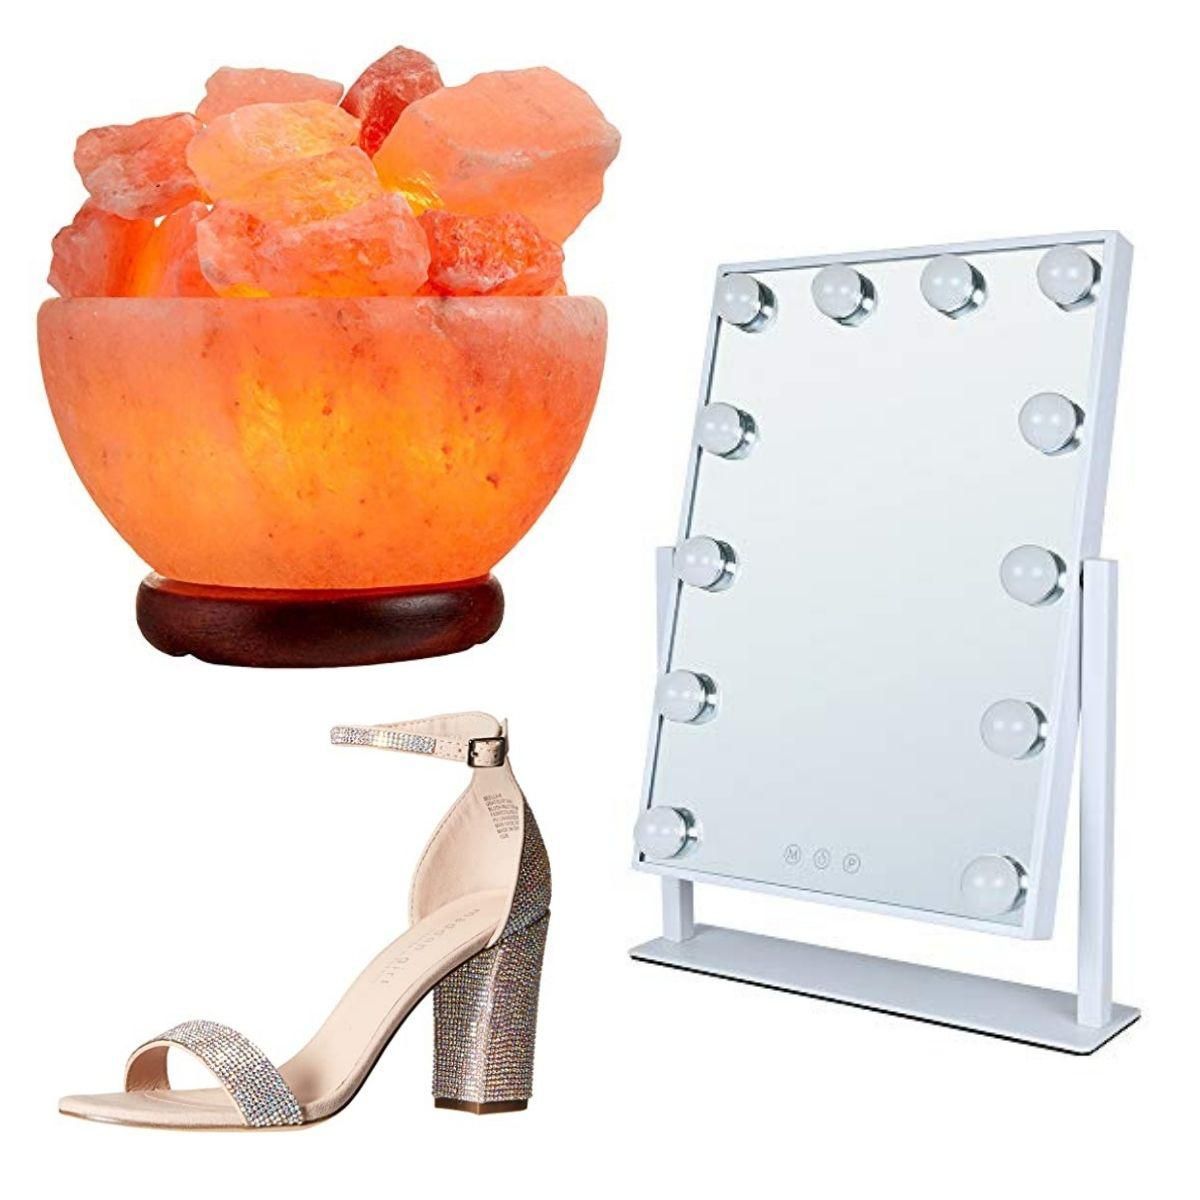 40 Of The Most Bougie Gifts To Give This Holiday Season